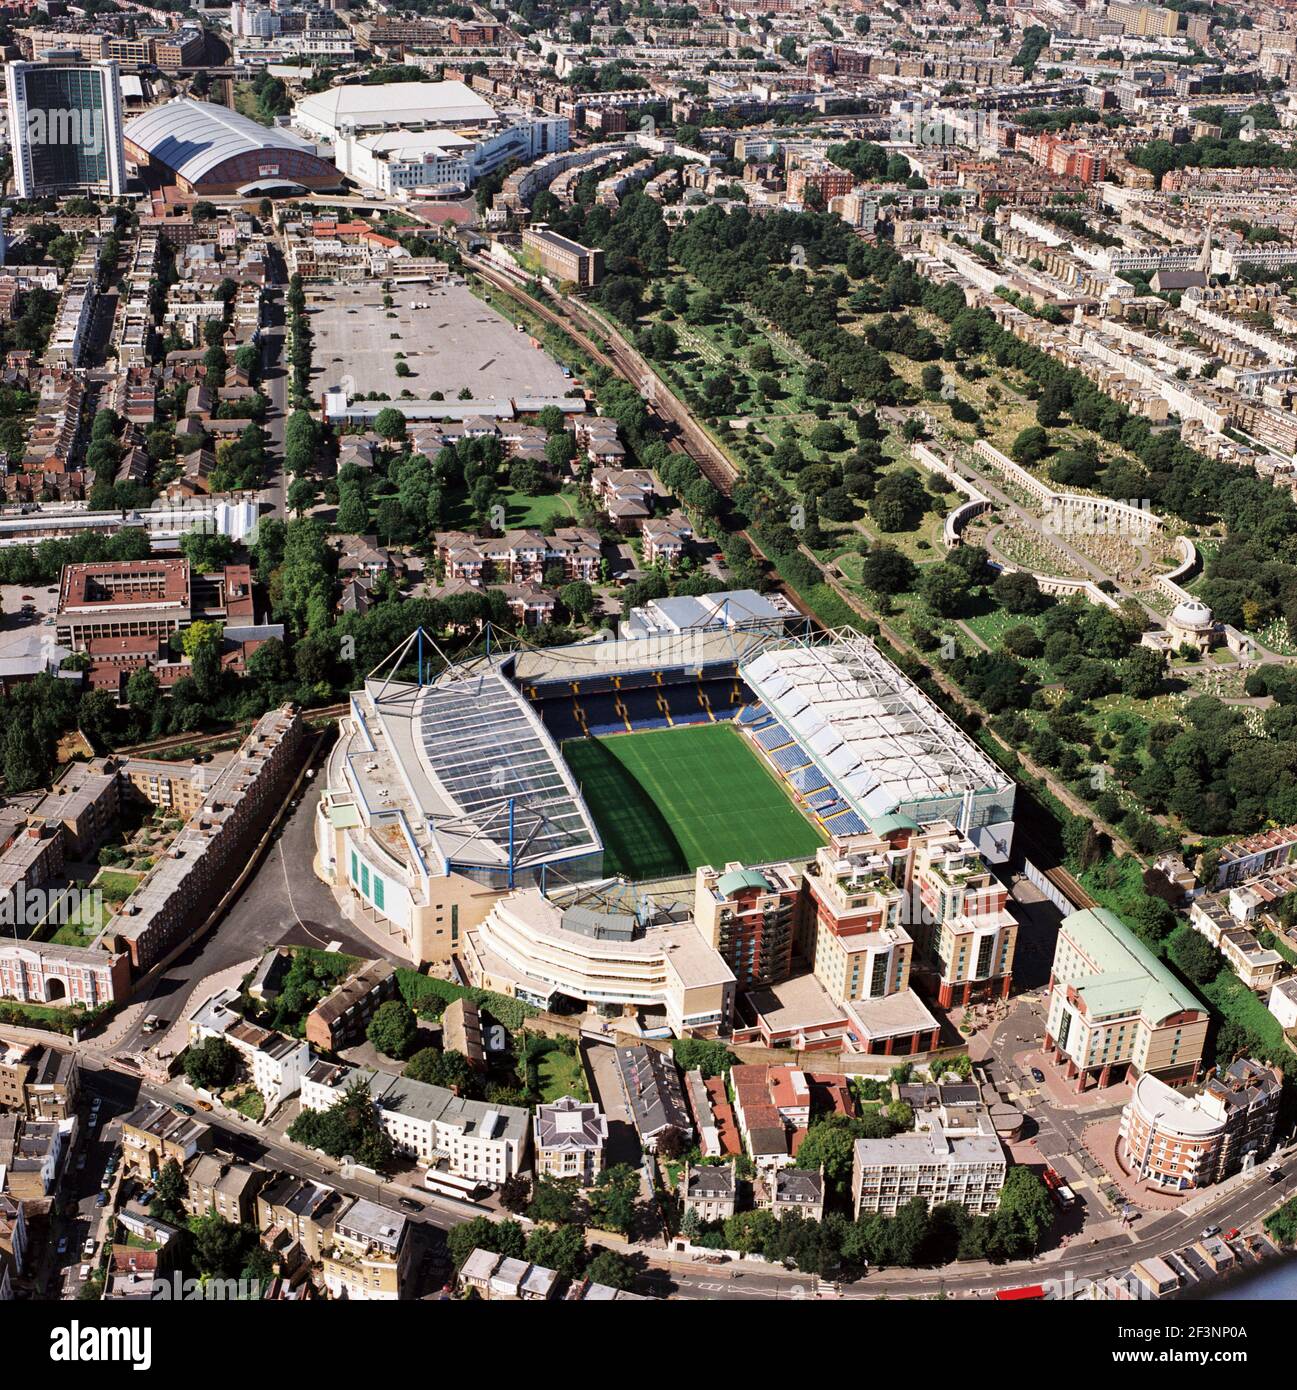 Aerial view of Chelsea Football Club in London, also known as